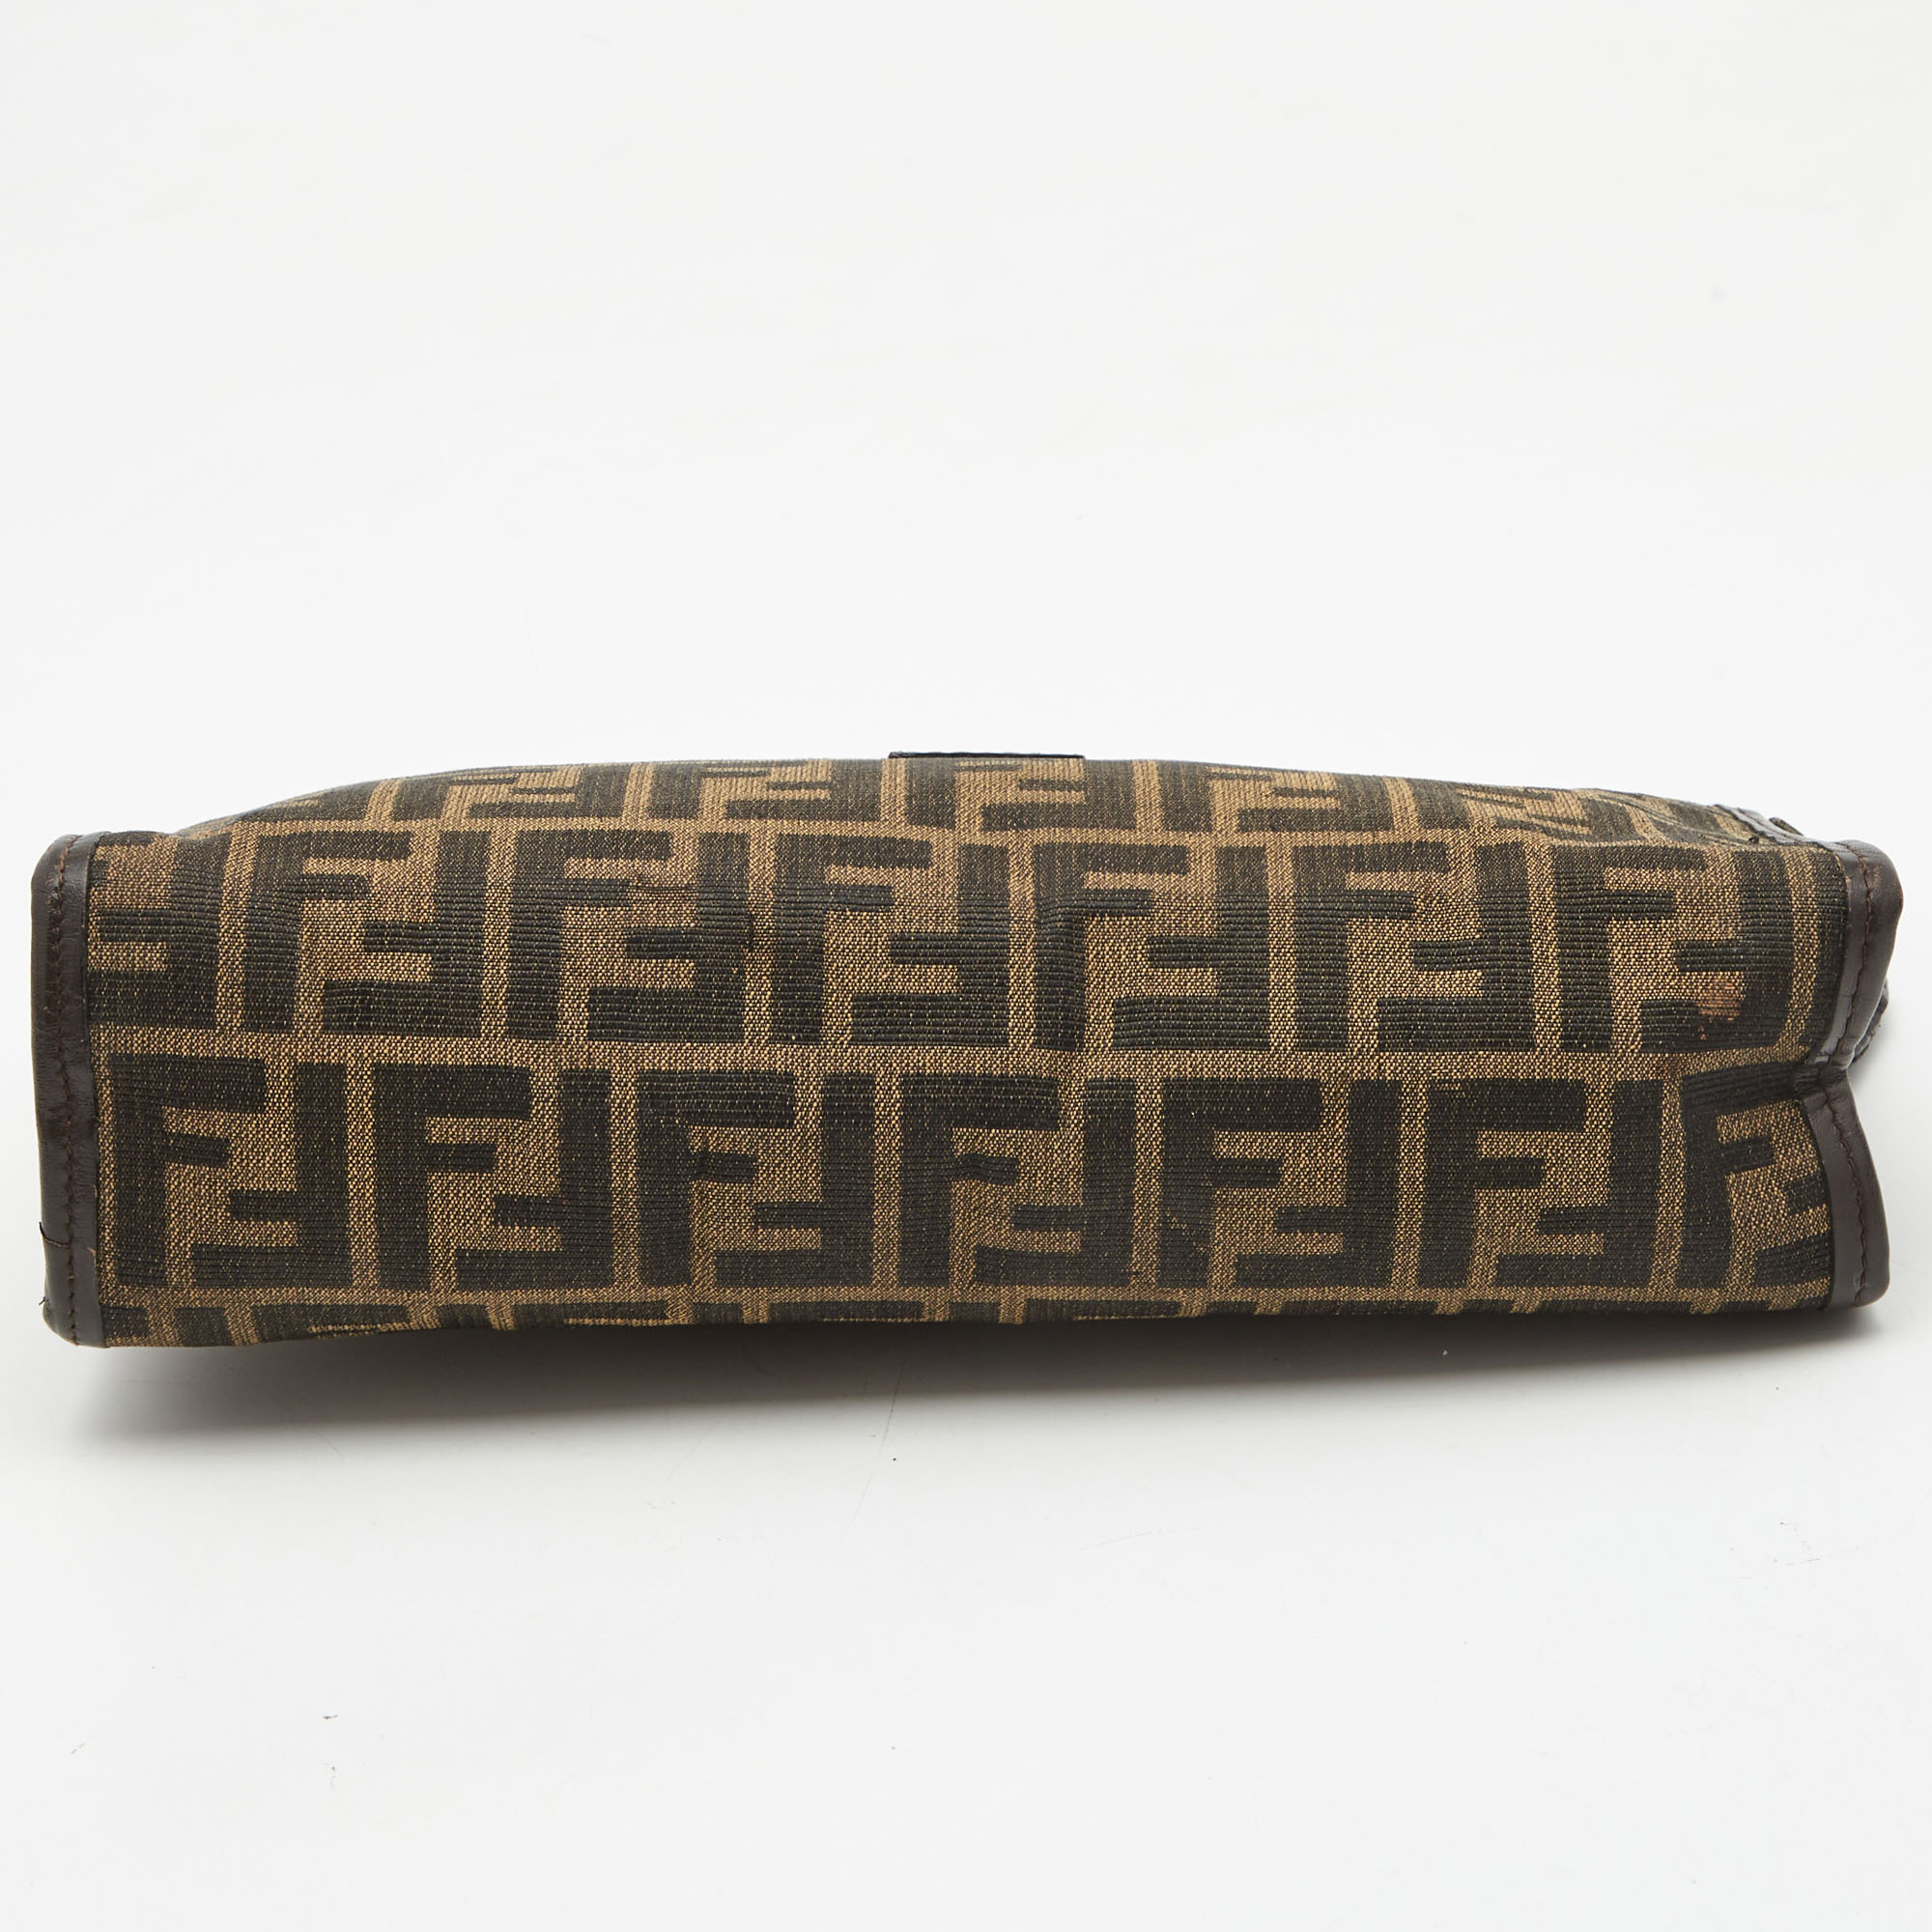 Sold at Auction: FENDI Zucca Brown Jacquard Cosmetic Hand Carry Bag